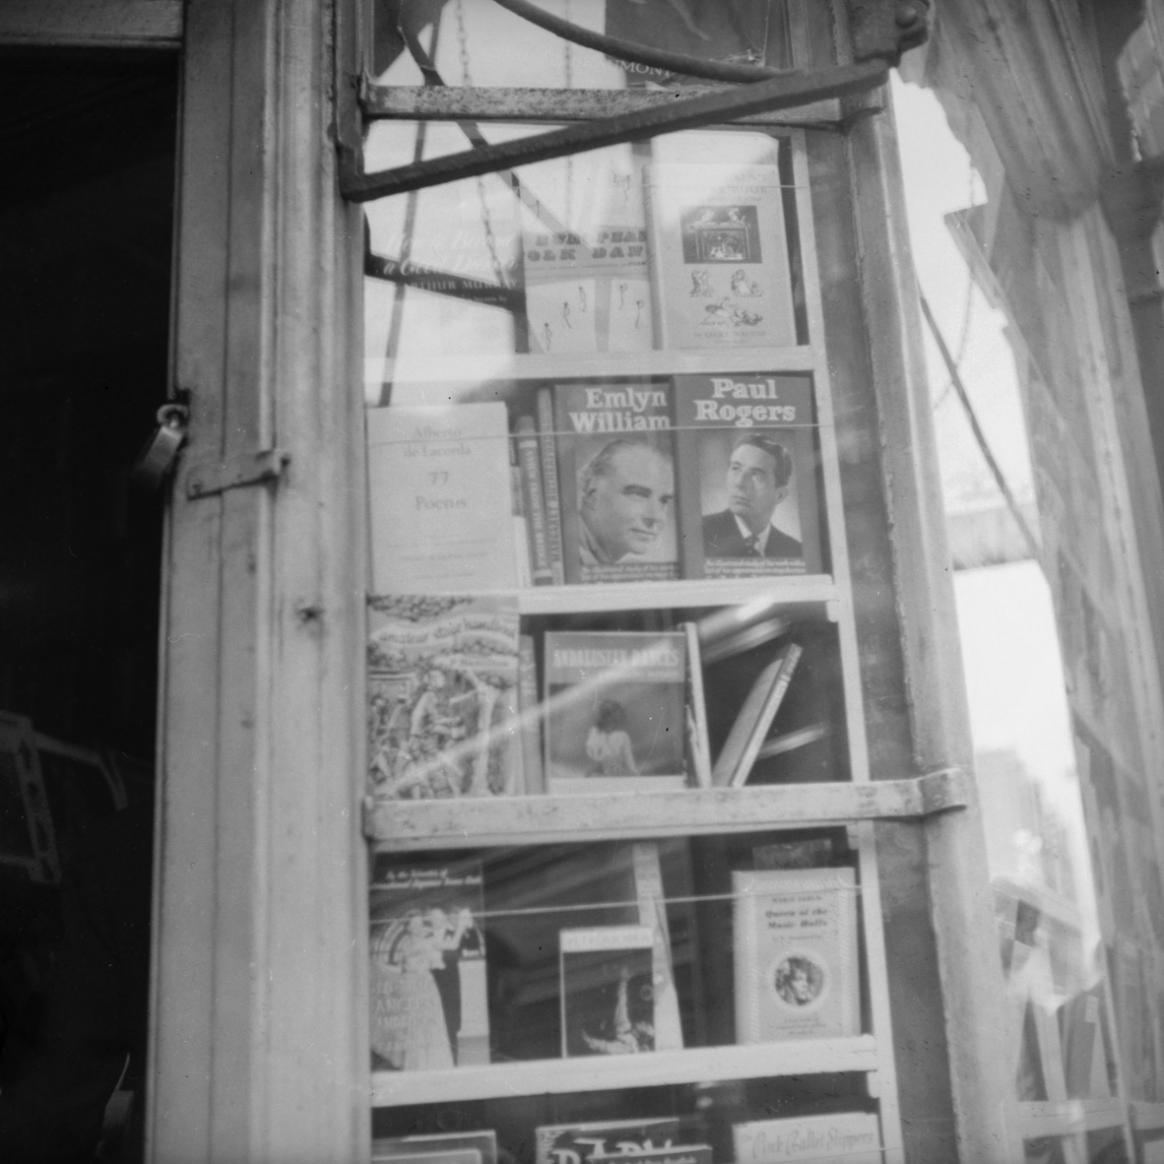 Display window in Cyril Beaumont's store with a copy of 77 Poems, Charing Cross Road, London, 1955 